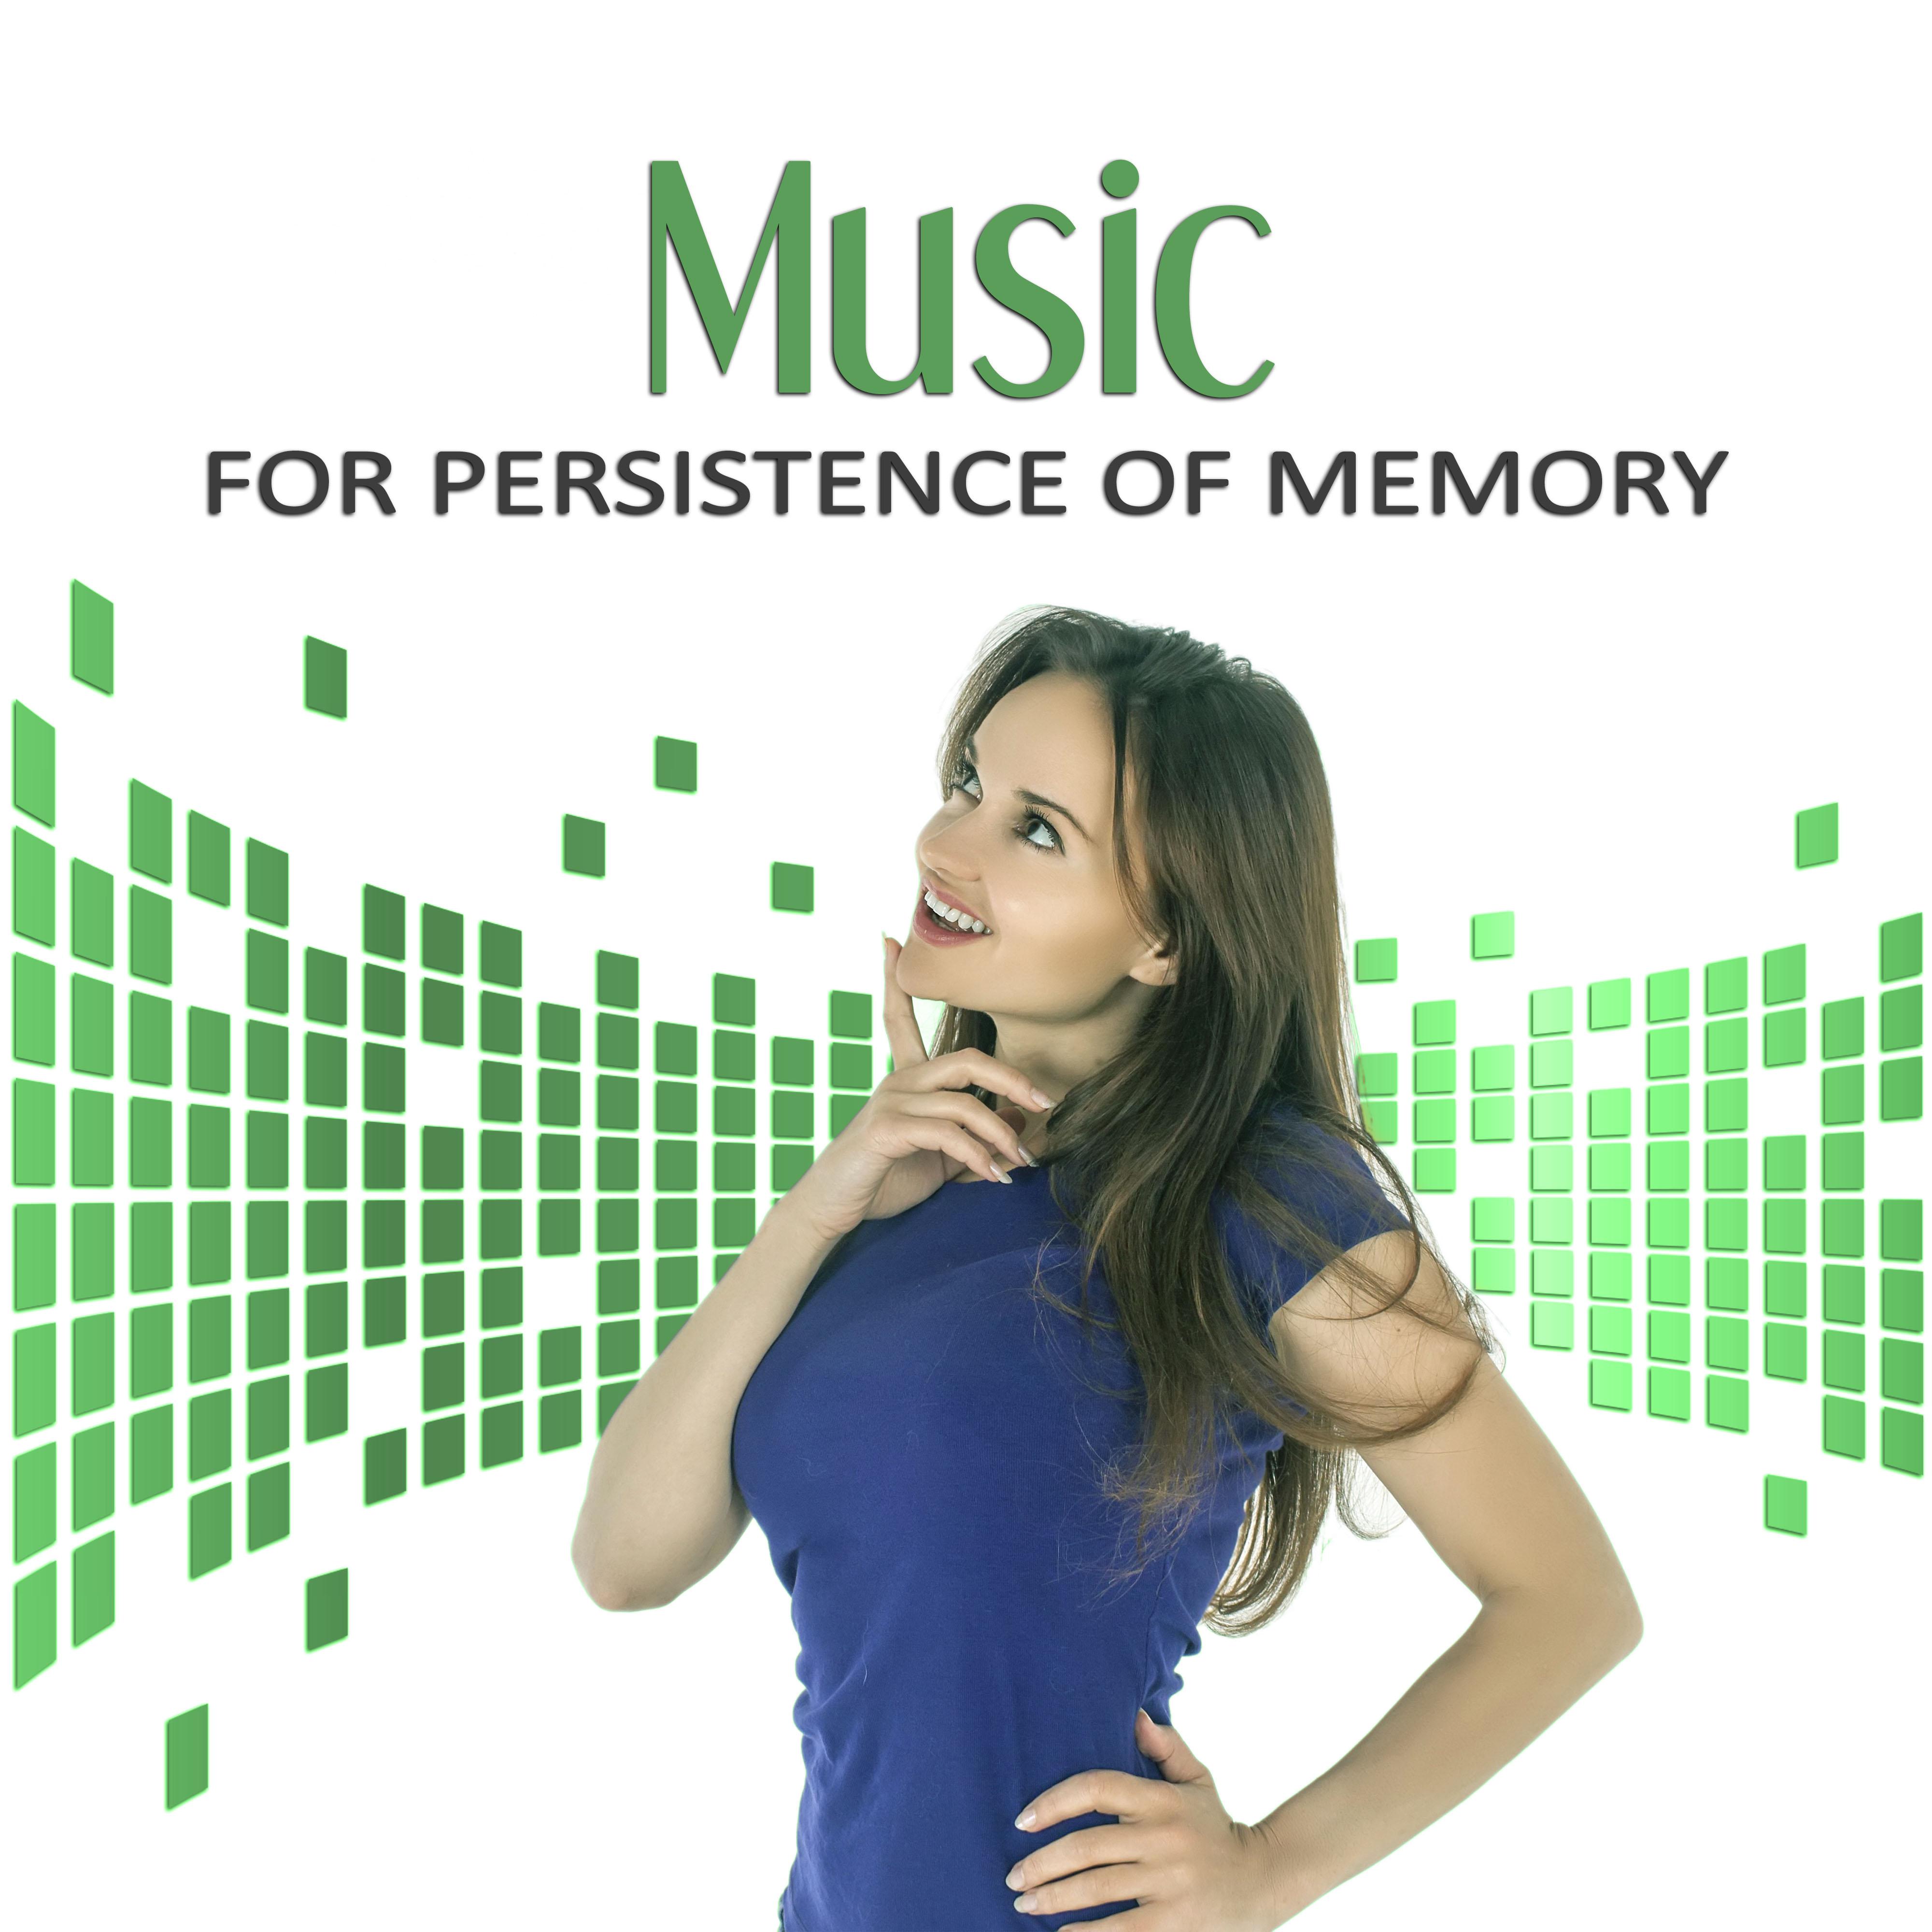 Music for Persistence of Memory  Mindfulness Meditation, Calm Music to Learn, Deep Sounds for Concentration, Learning Skills